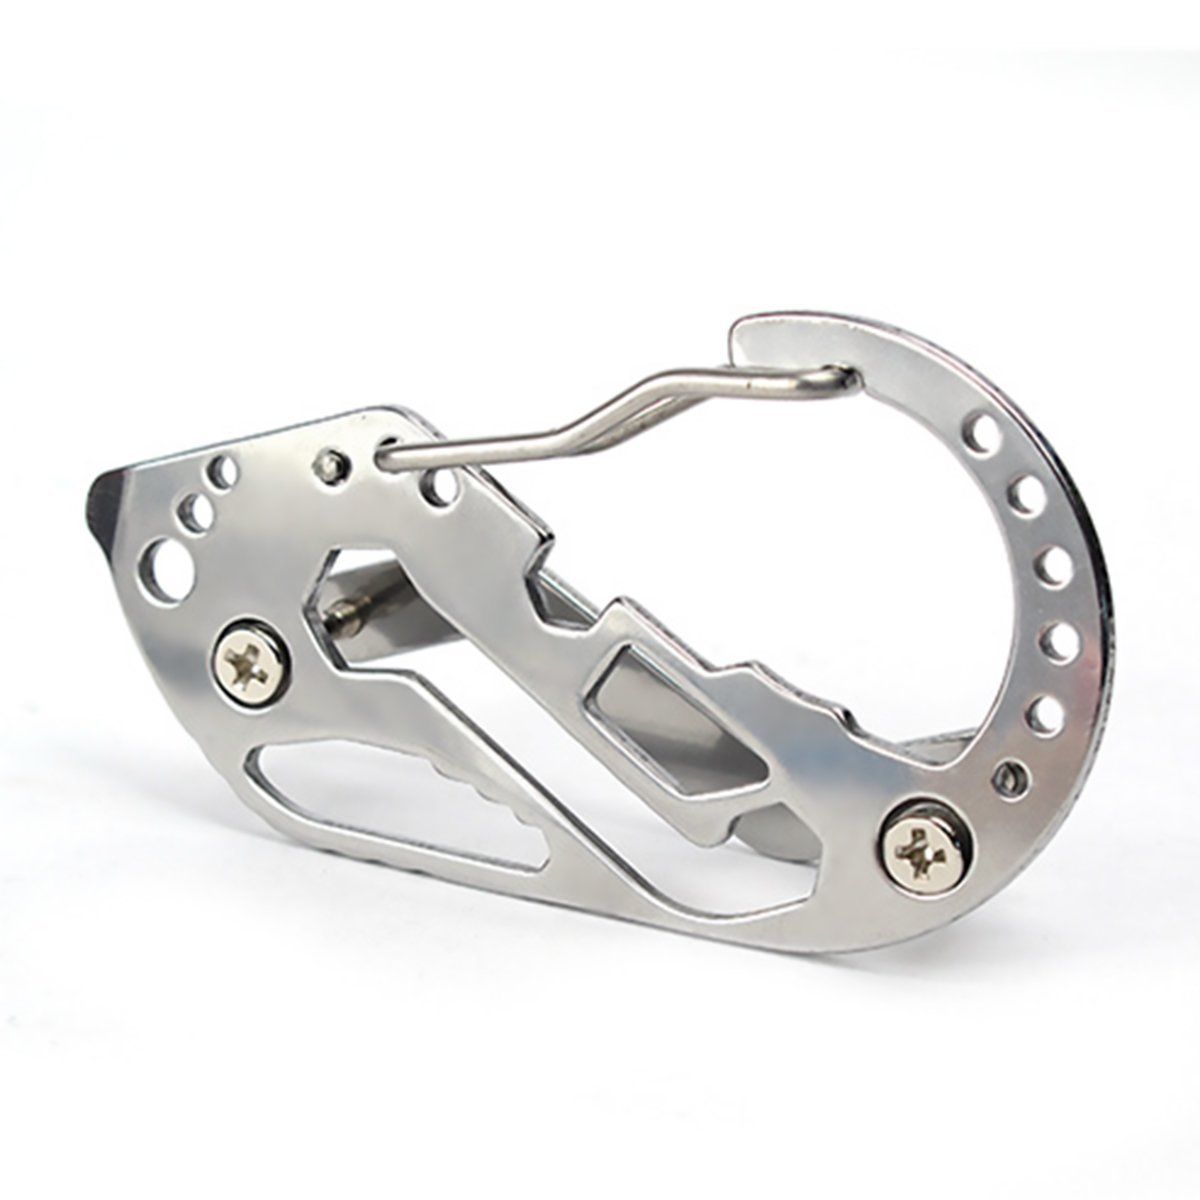 retractable key holder heavy duty chain stainless